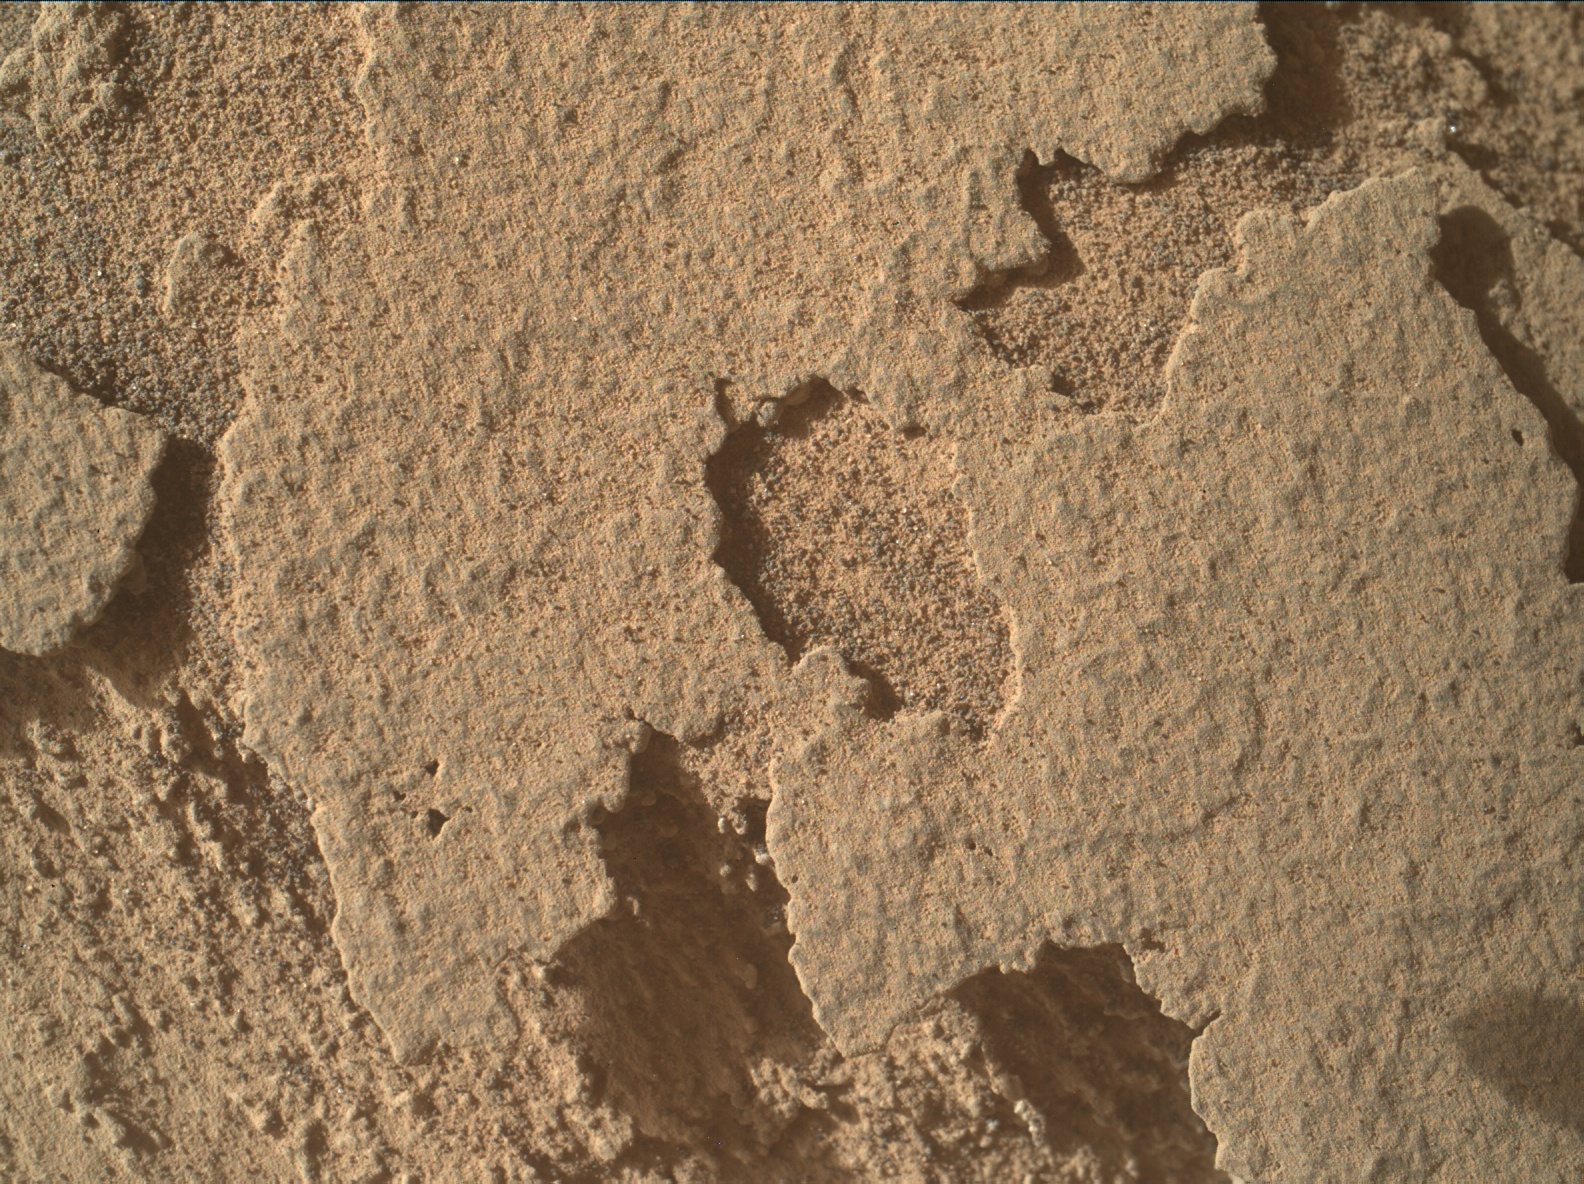 Nasa's Mars rover Curiosity acquired this image using its Mars Hand Lens Imager (MAHLI) on Sol 3877